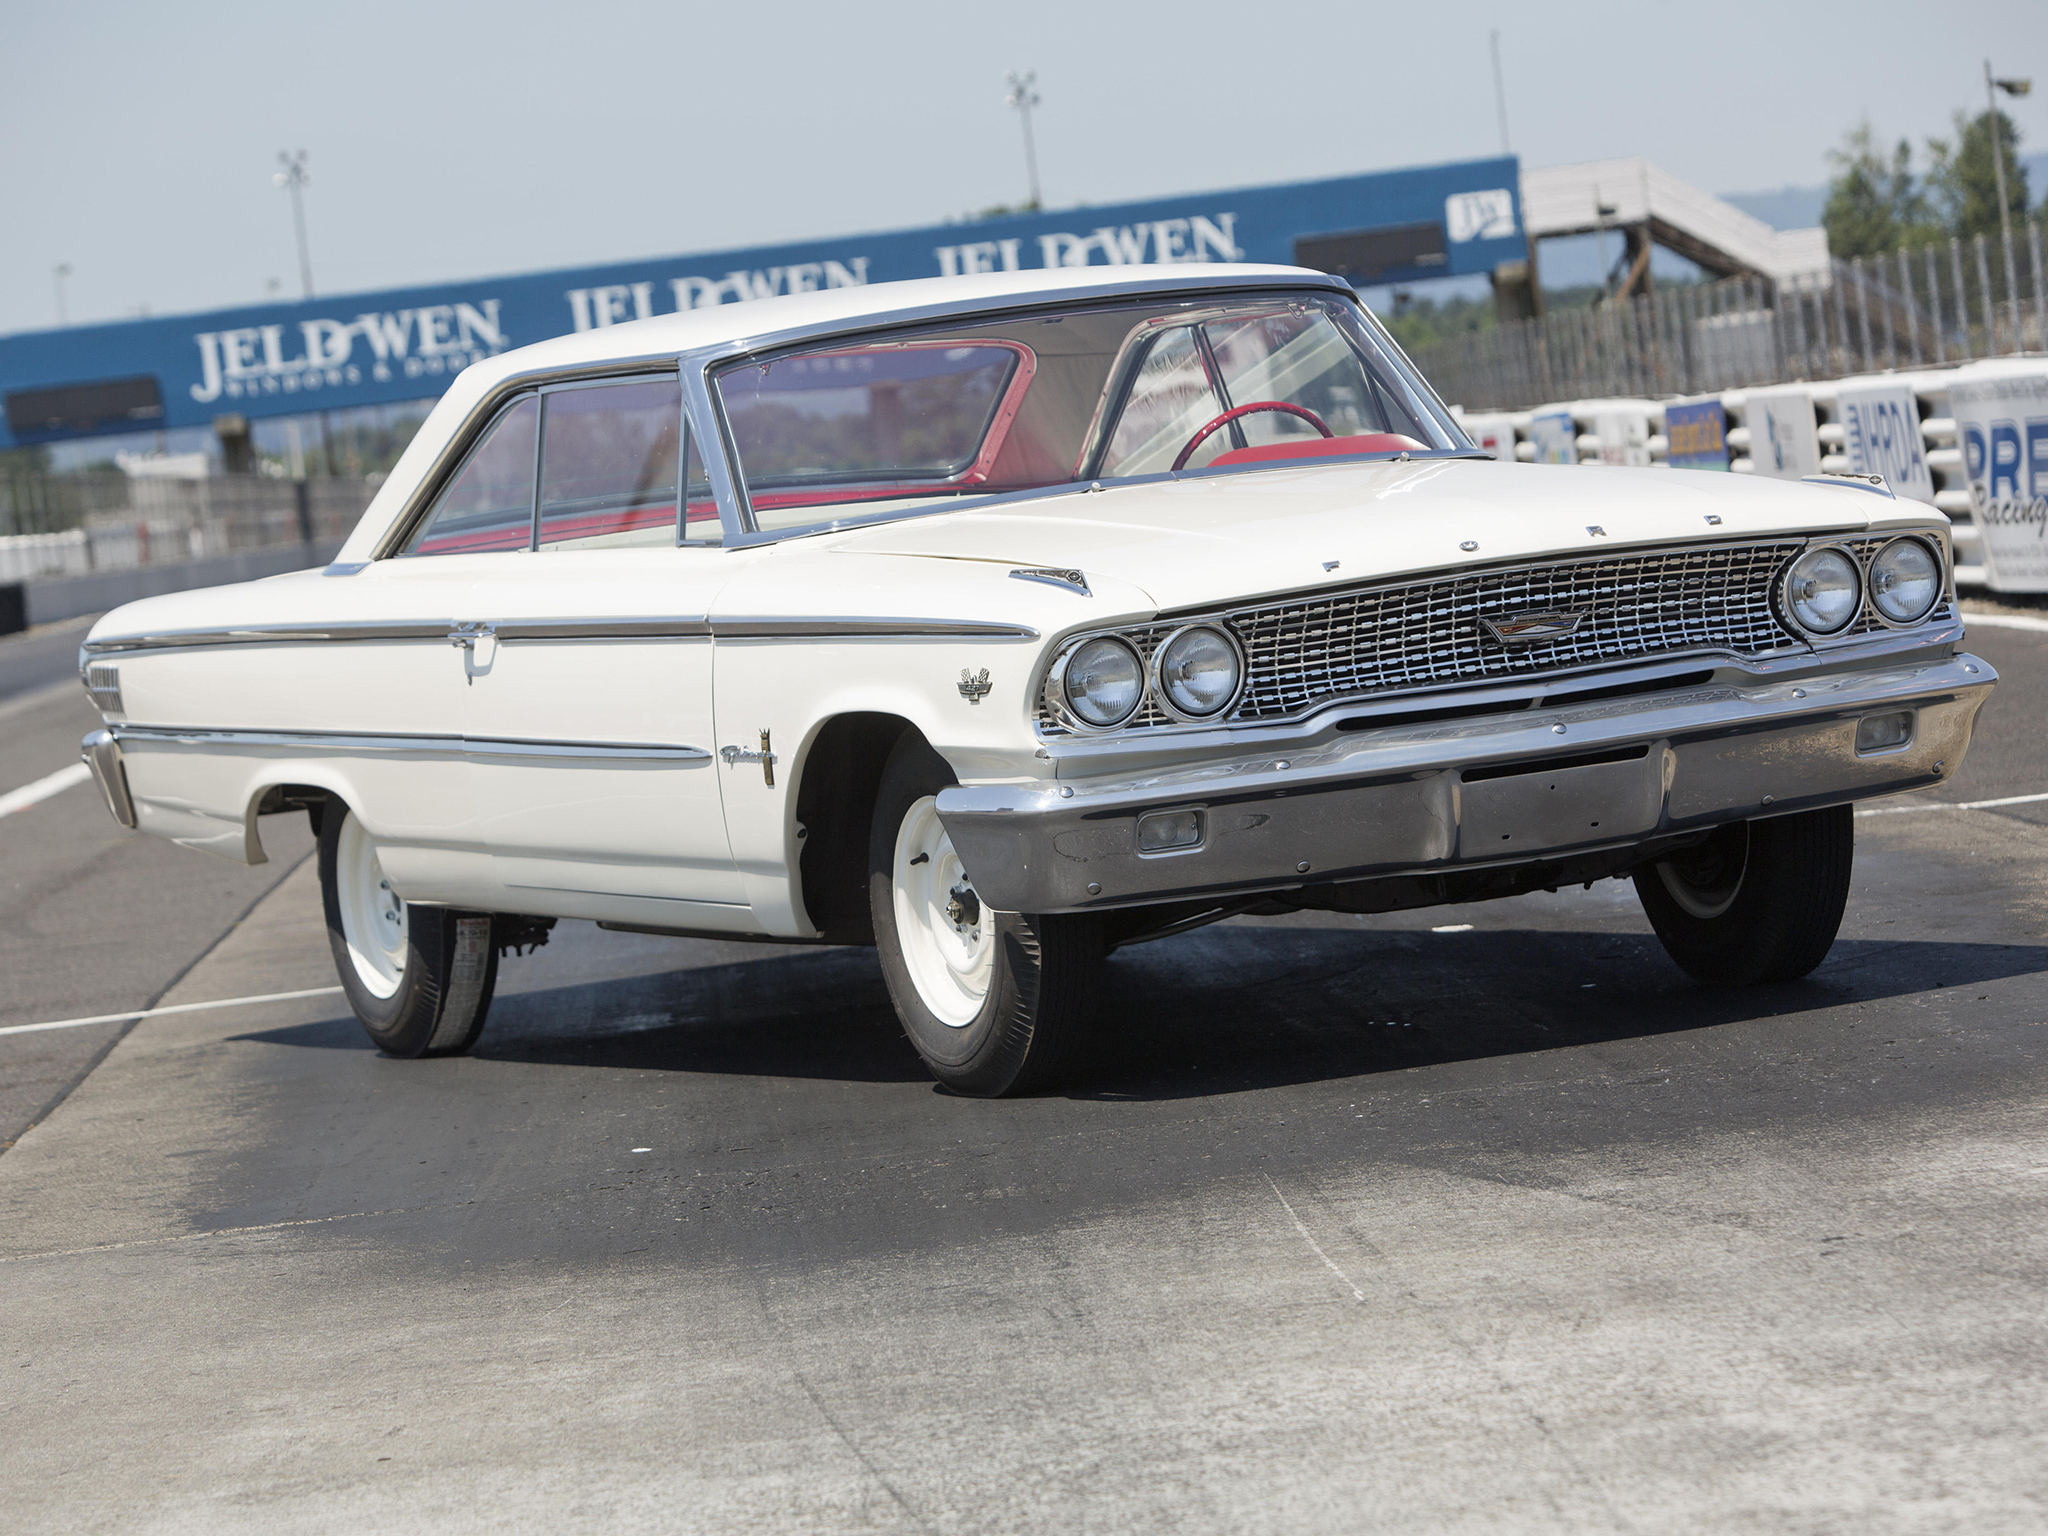 1963, Ford, Galaxie, 500, Factory, Lightweight, Drag, Racing, Race, Muscle, Classic Wallpaper